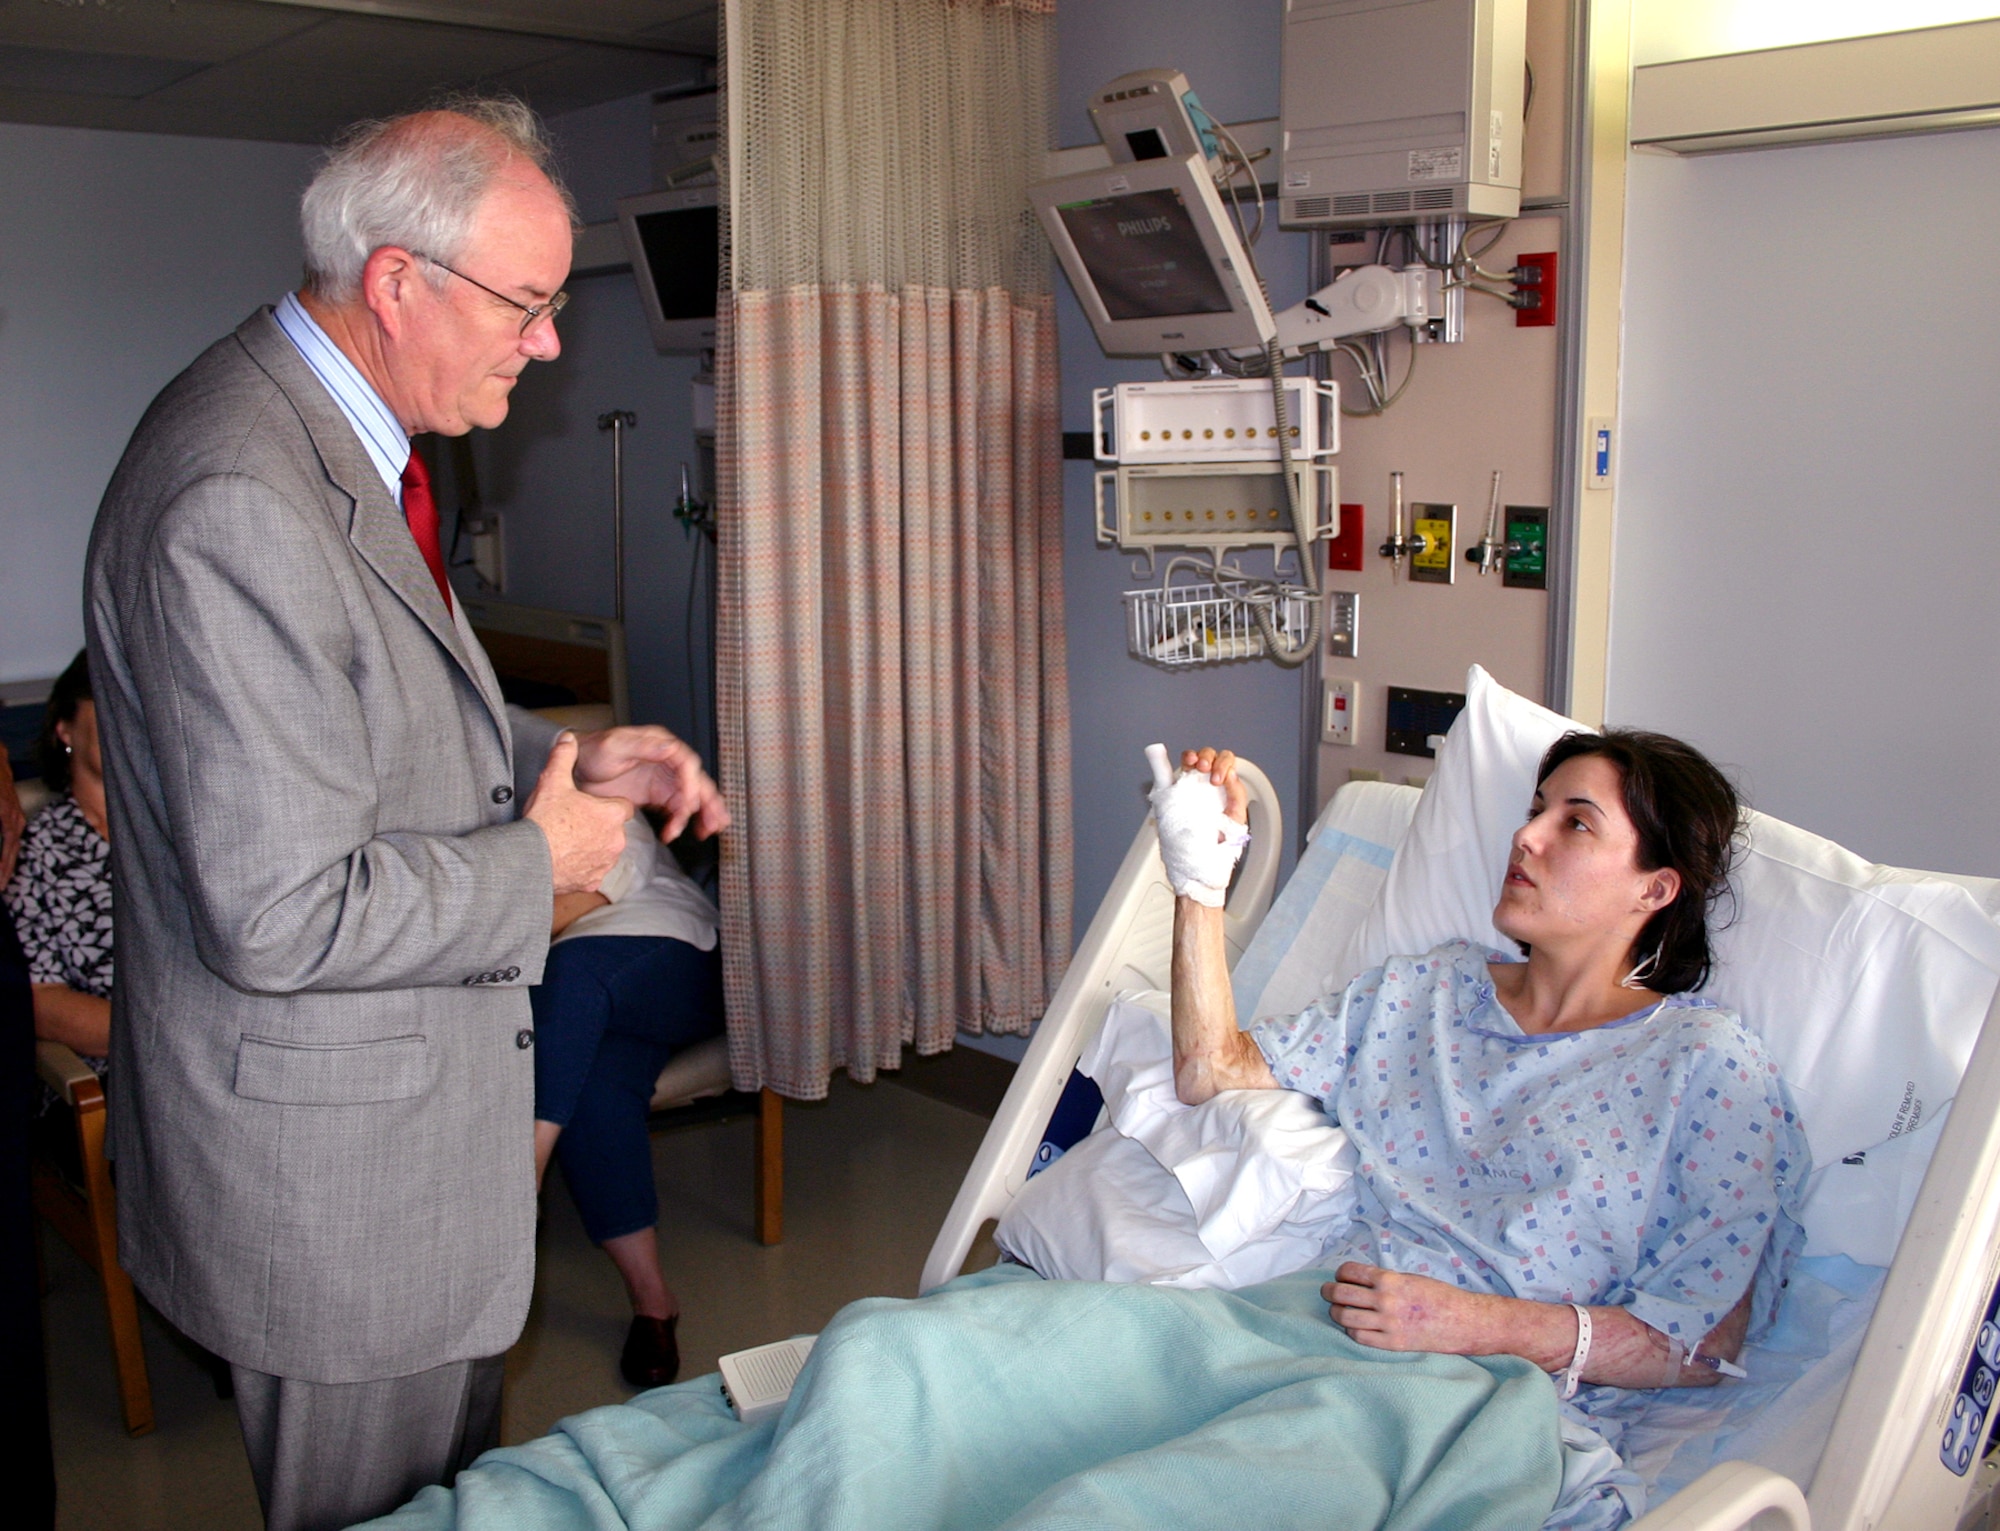 Capt. Therese Frentz explains her injuries to Secretary of the Air Force Michael W. Wynne at Brooke Army Medical Center on Thursday, June 1, 2006. Secretary Wynne was in San Antonio visiting various military installations and training sites. Captain Frentz was hospitalized for skin graft surgery this week. She was injured in October 2004 when a suicide bomber attacked a café in Baghdad's Green Zone. Her injuries included burns on 30 percent of her body and shrapnel to her knees and abdomen. (U.S. Air Force photo/2nd Lt. David Herndon)